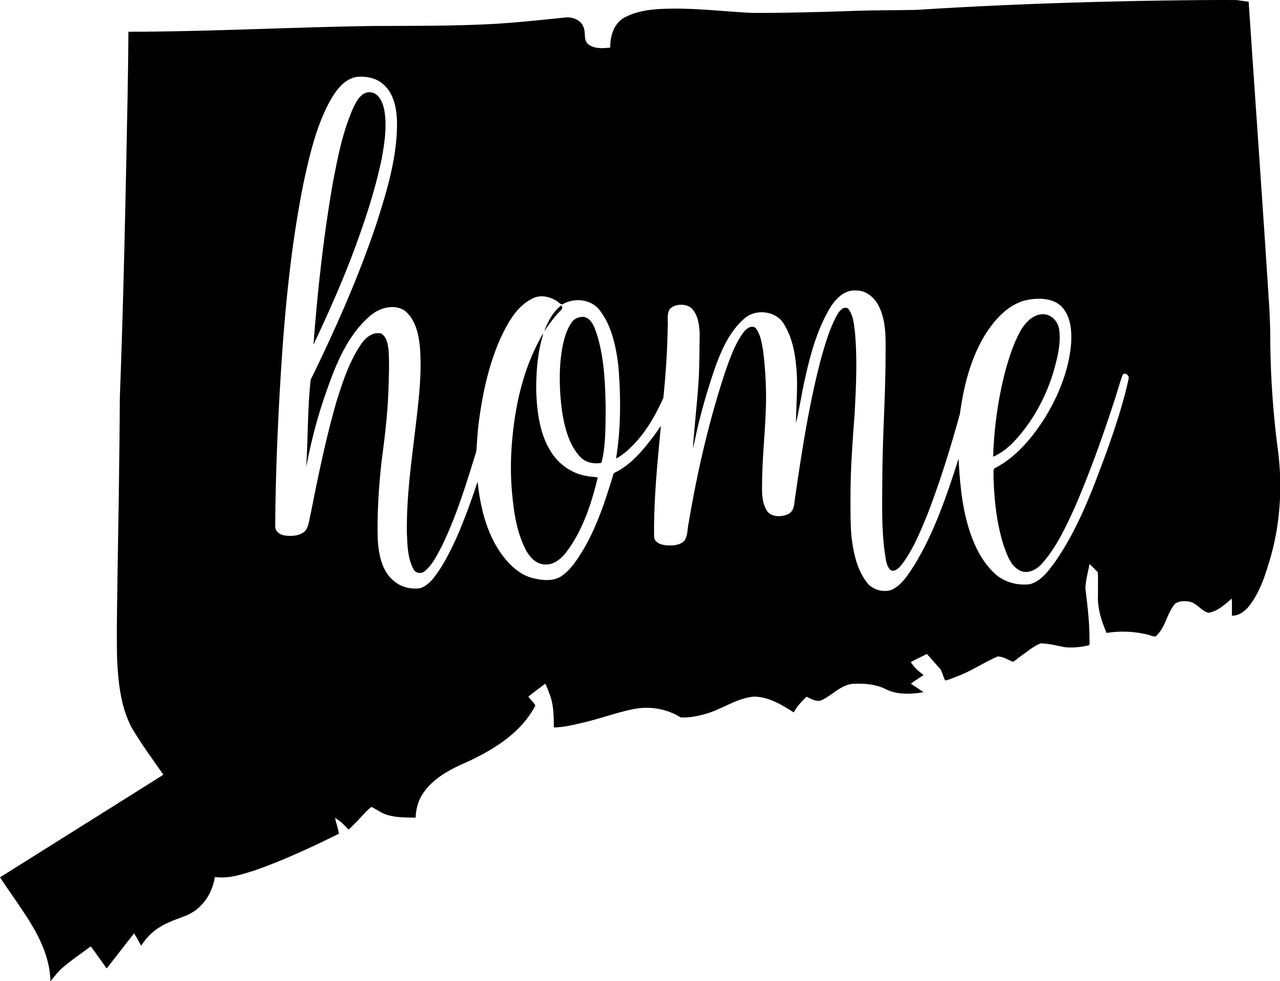 Connecticut State Vinyl Decal Sticker 6" x 4.5" Home - CT